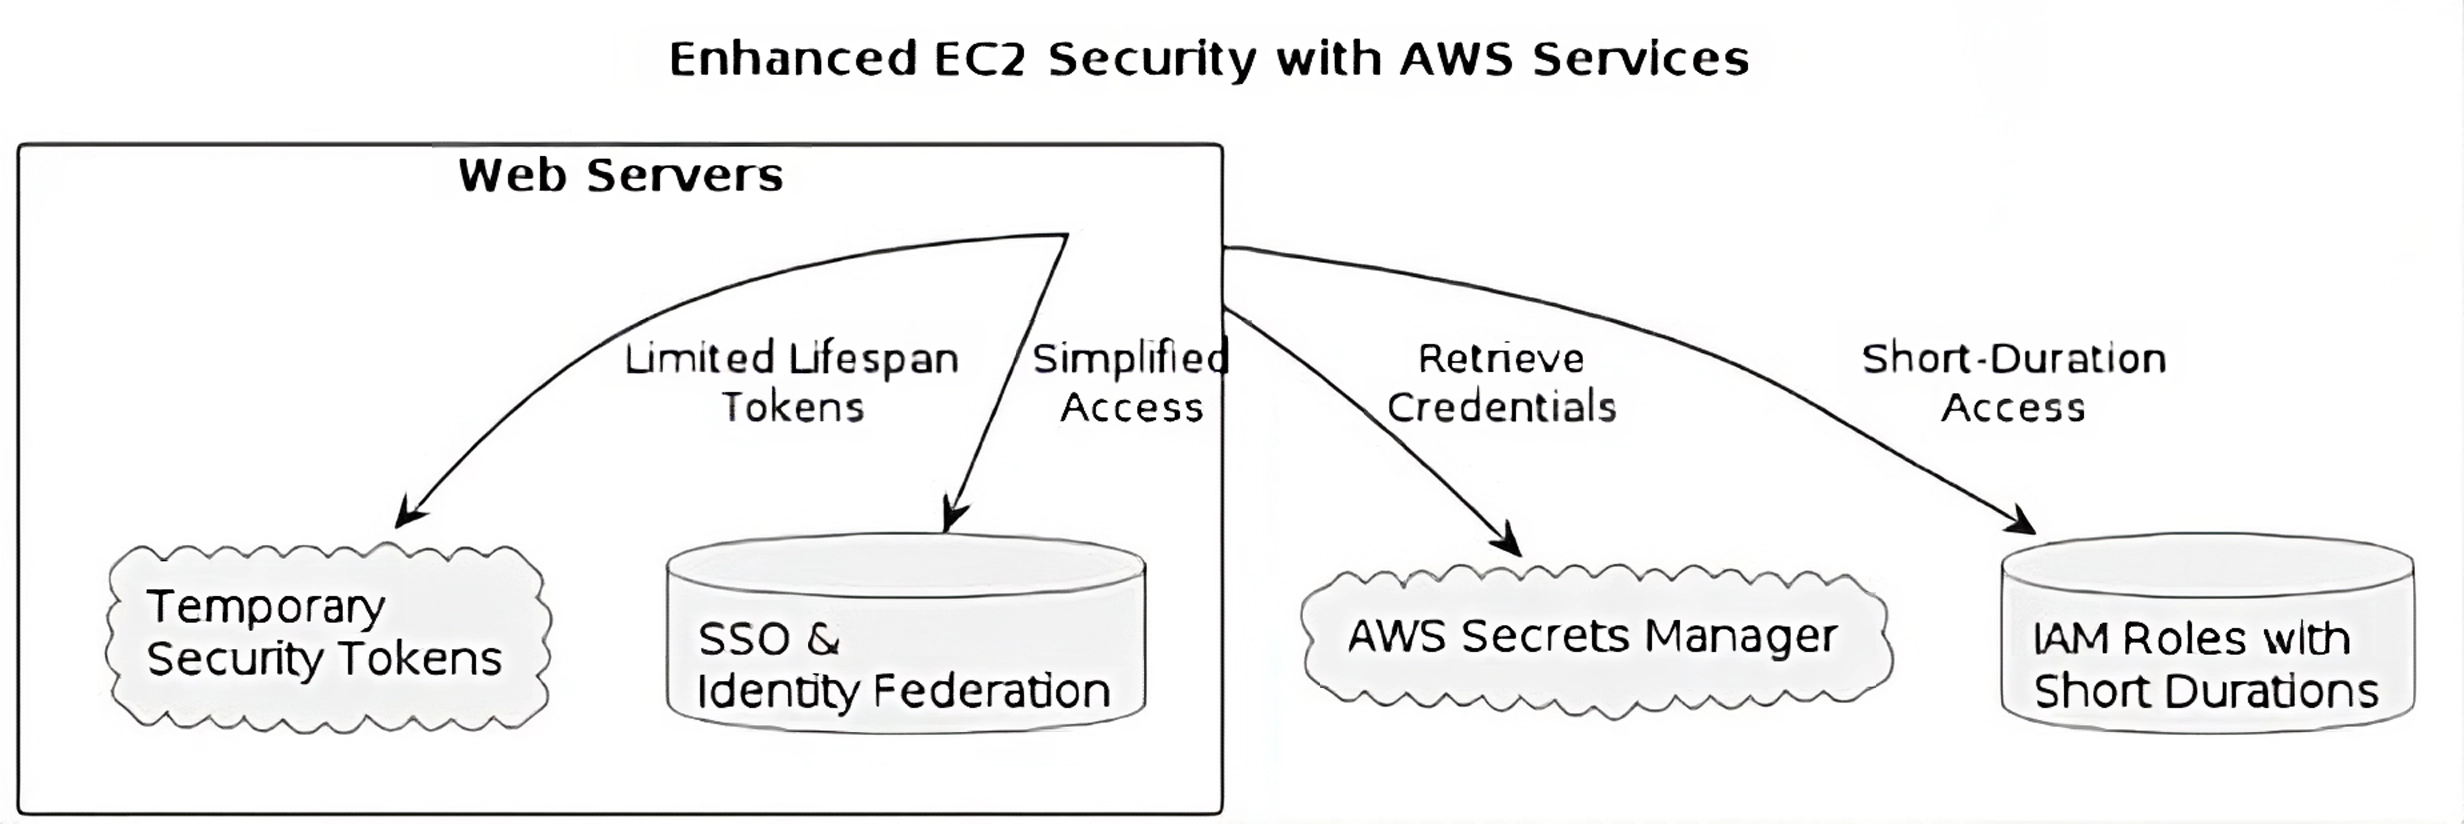 EC2 Protection with AWS Security Services